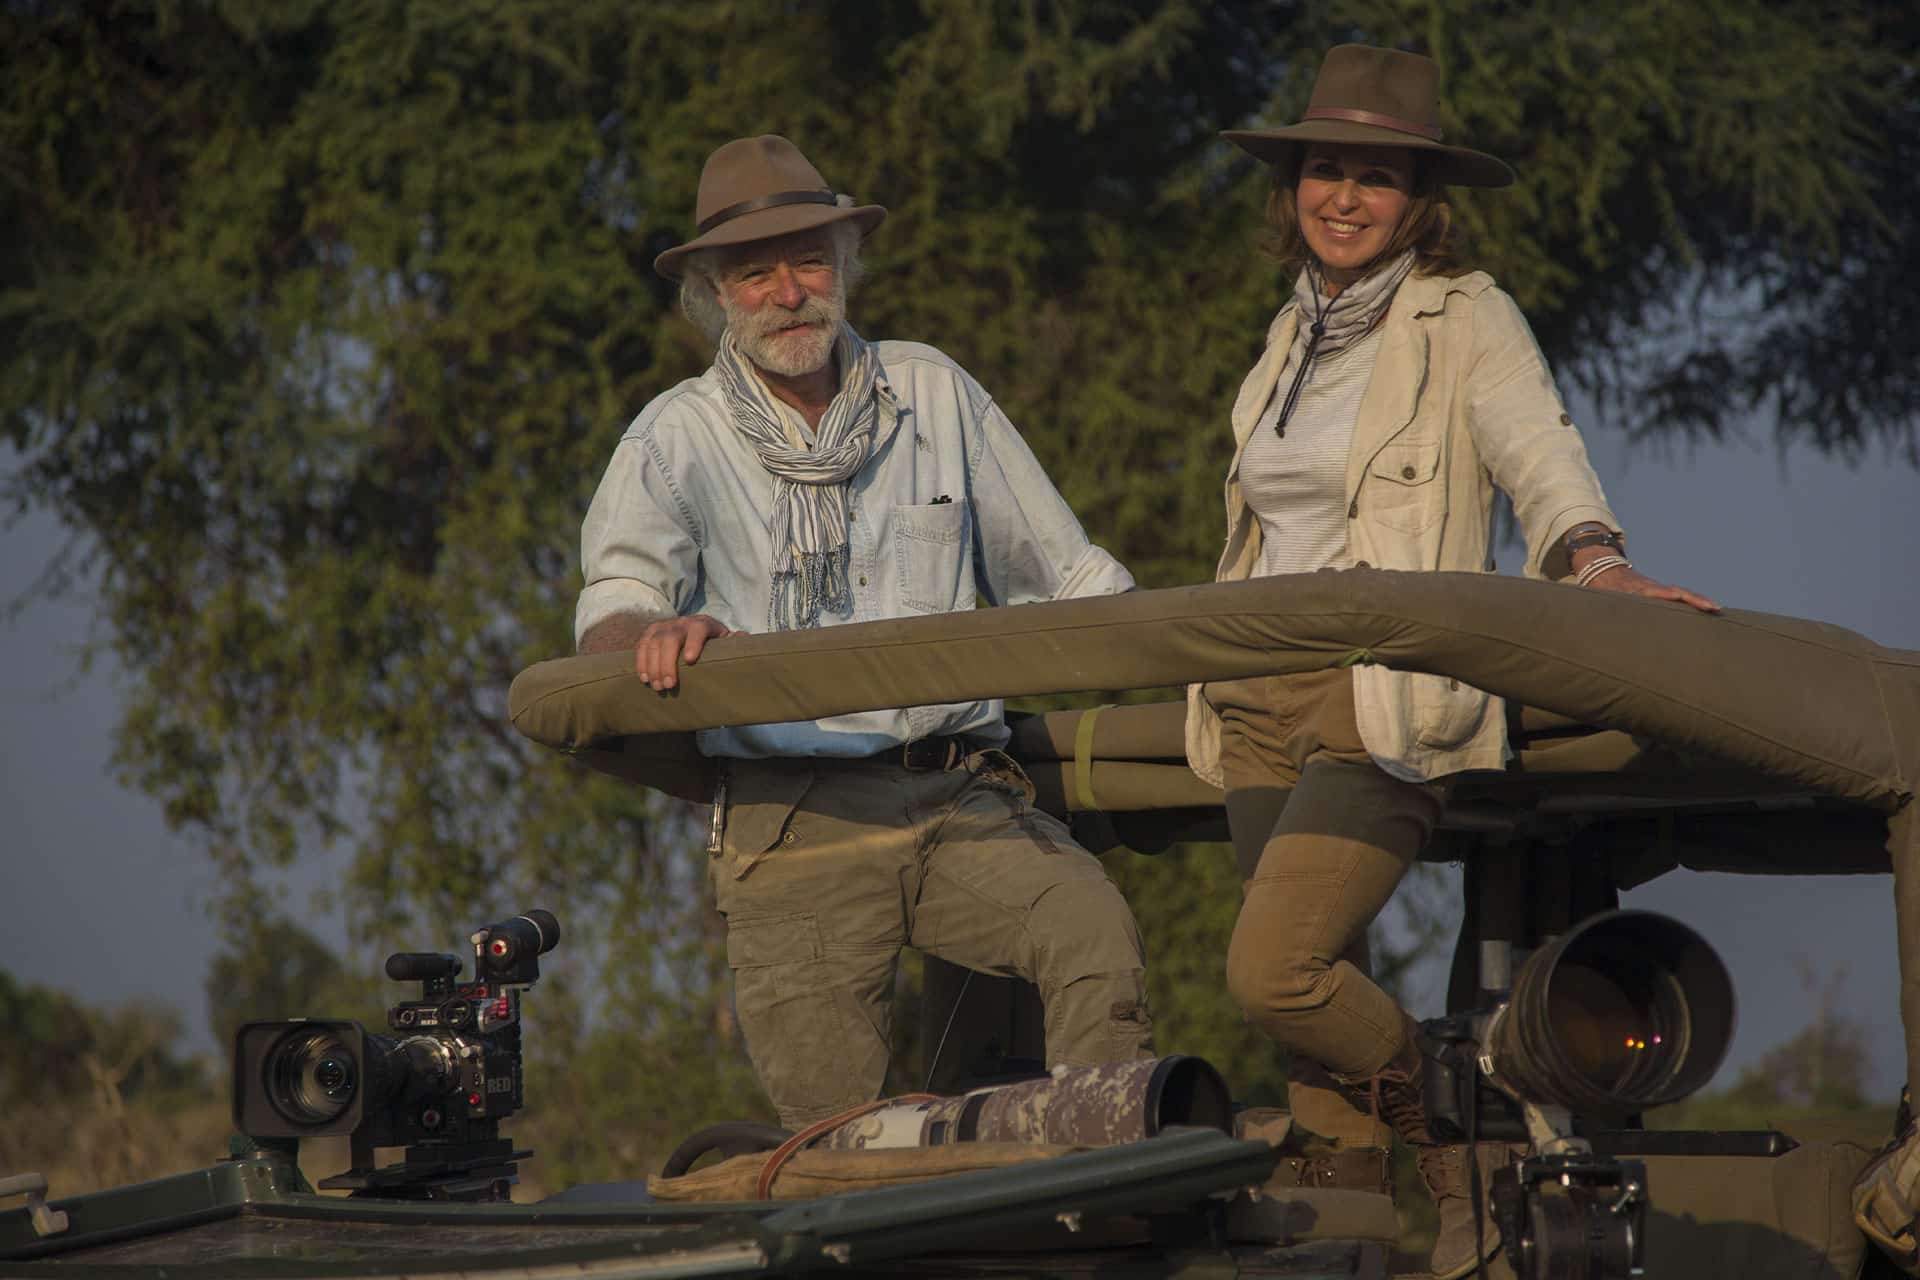 Photographers and filmmakers Dereck and Beverly Joubert standing in an open air safari vehicle smiling.